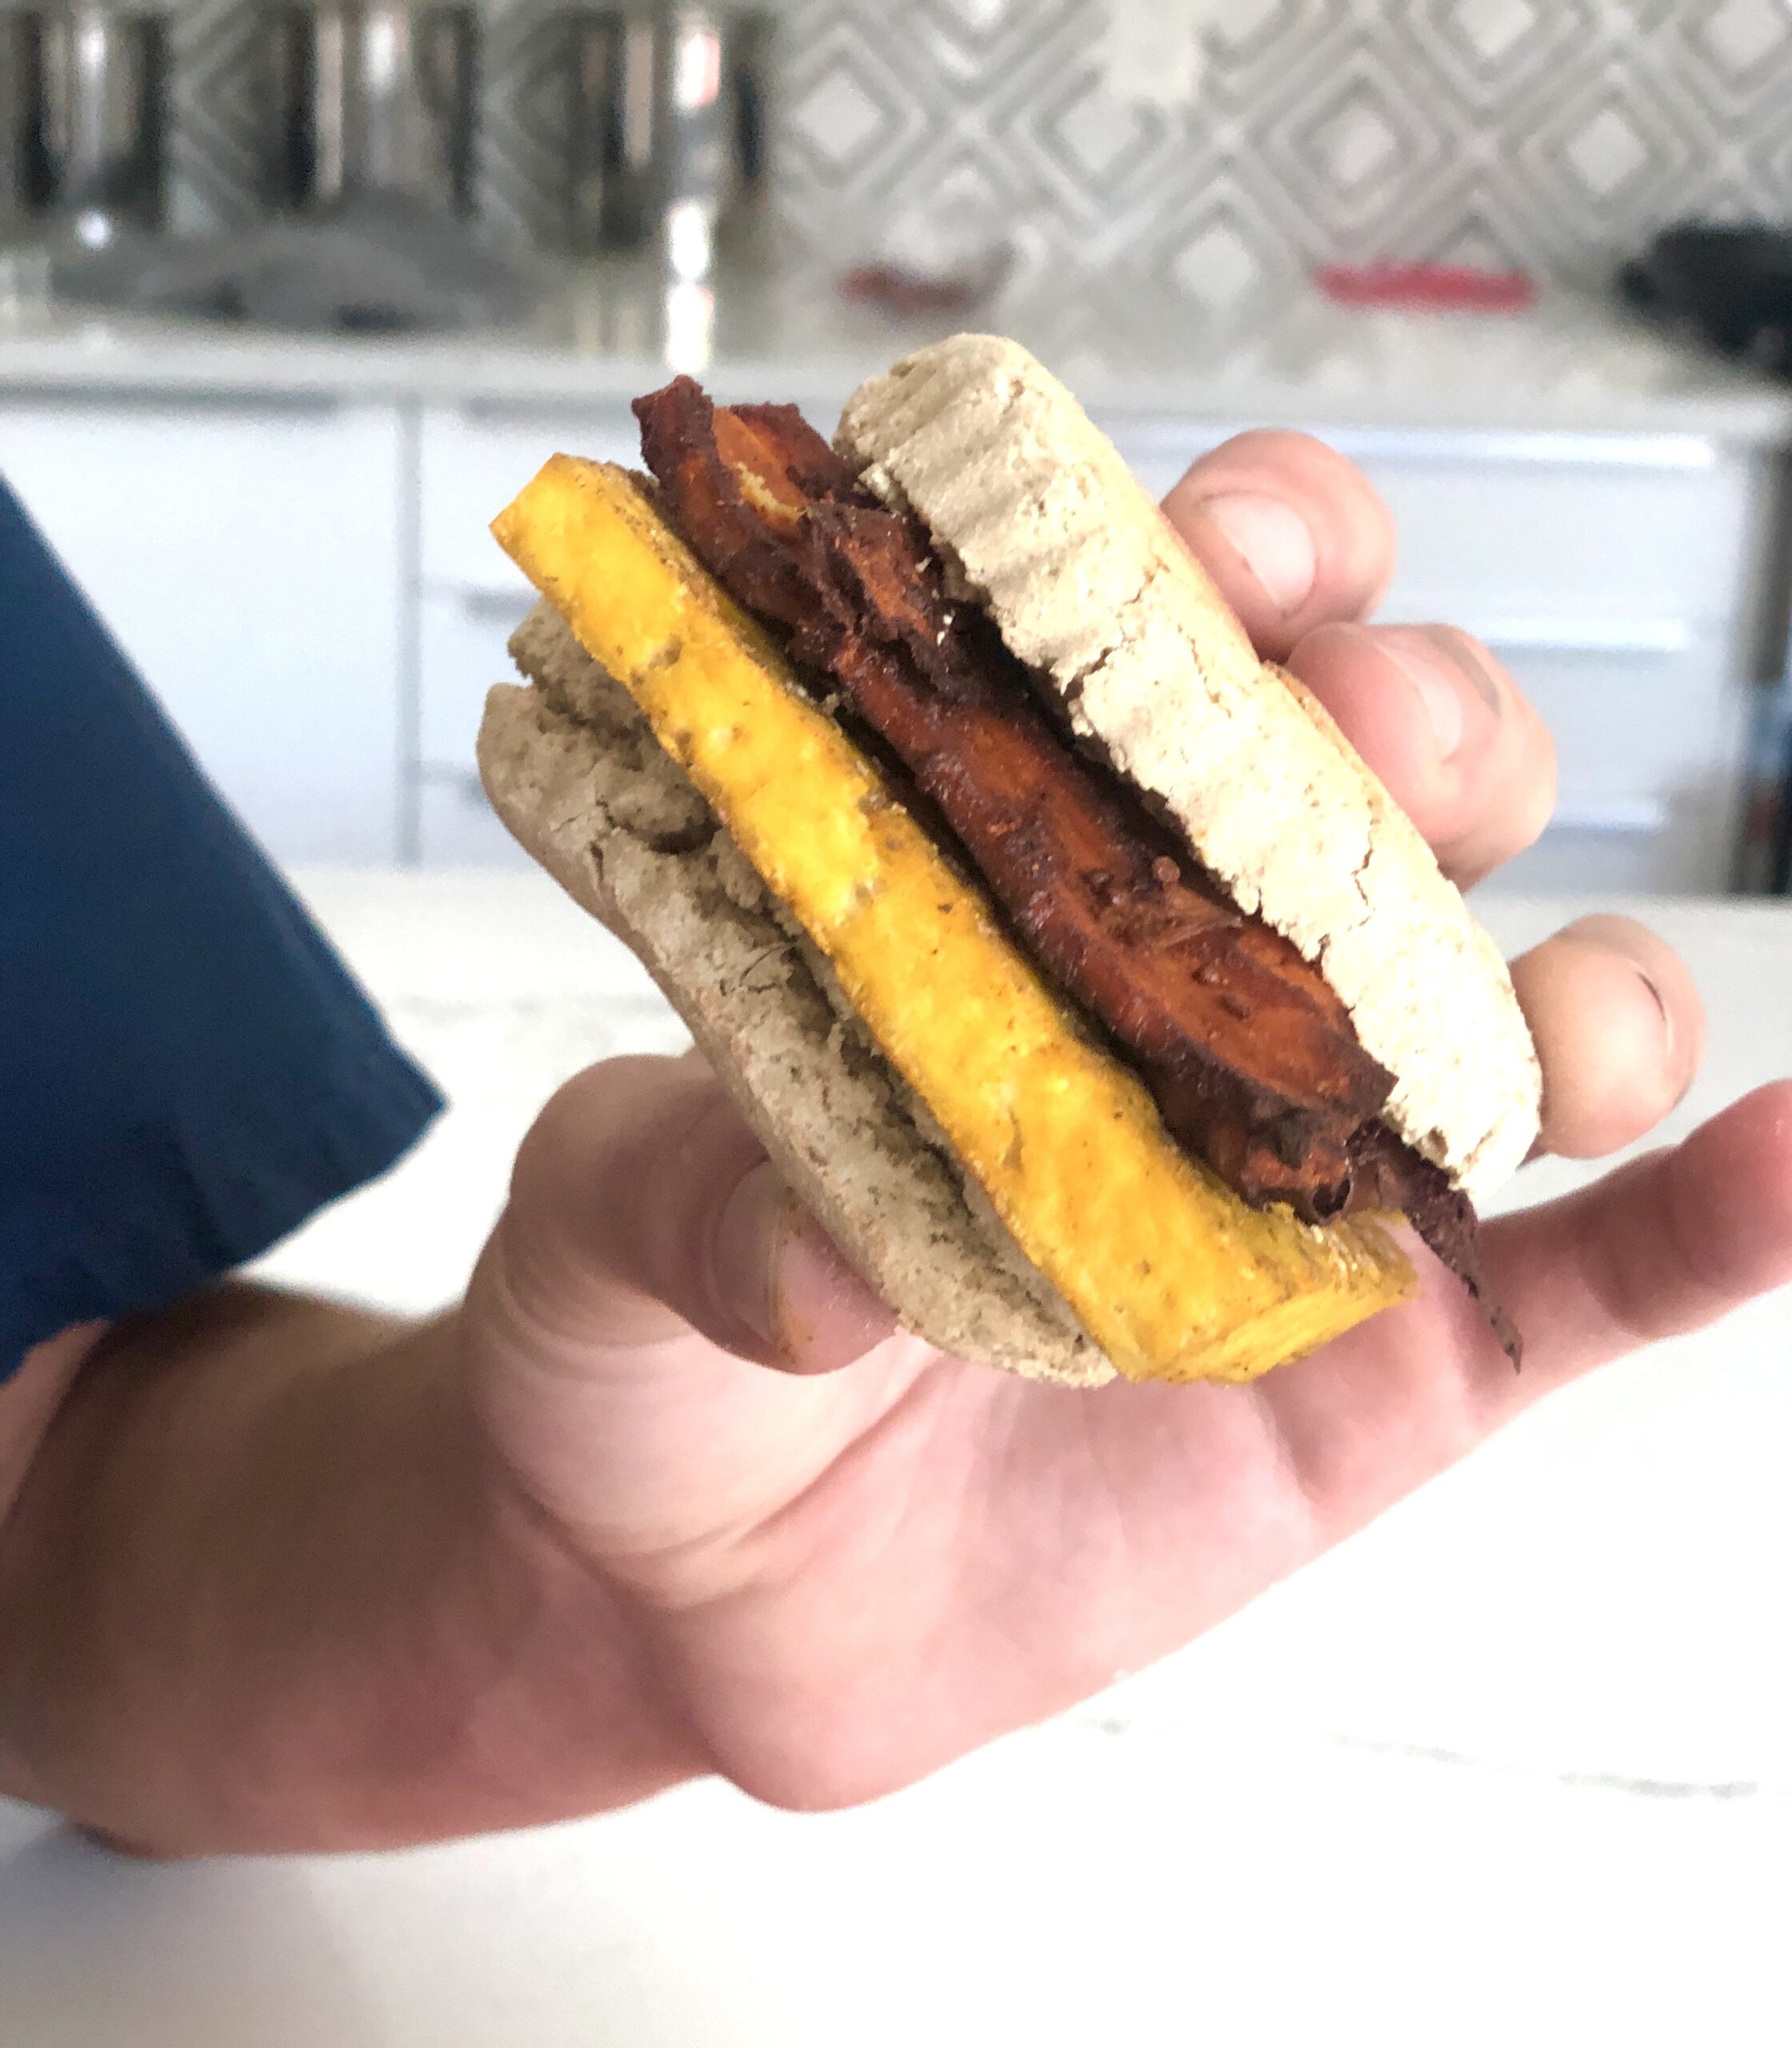 A hand holding a vegan breakfast sandwich. The sandwich consists of a tofu egg and shitake bacon on a biscuit